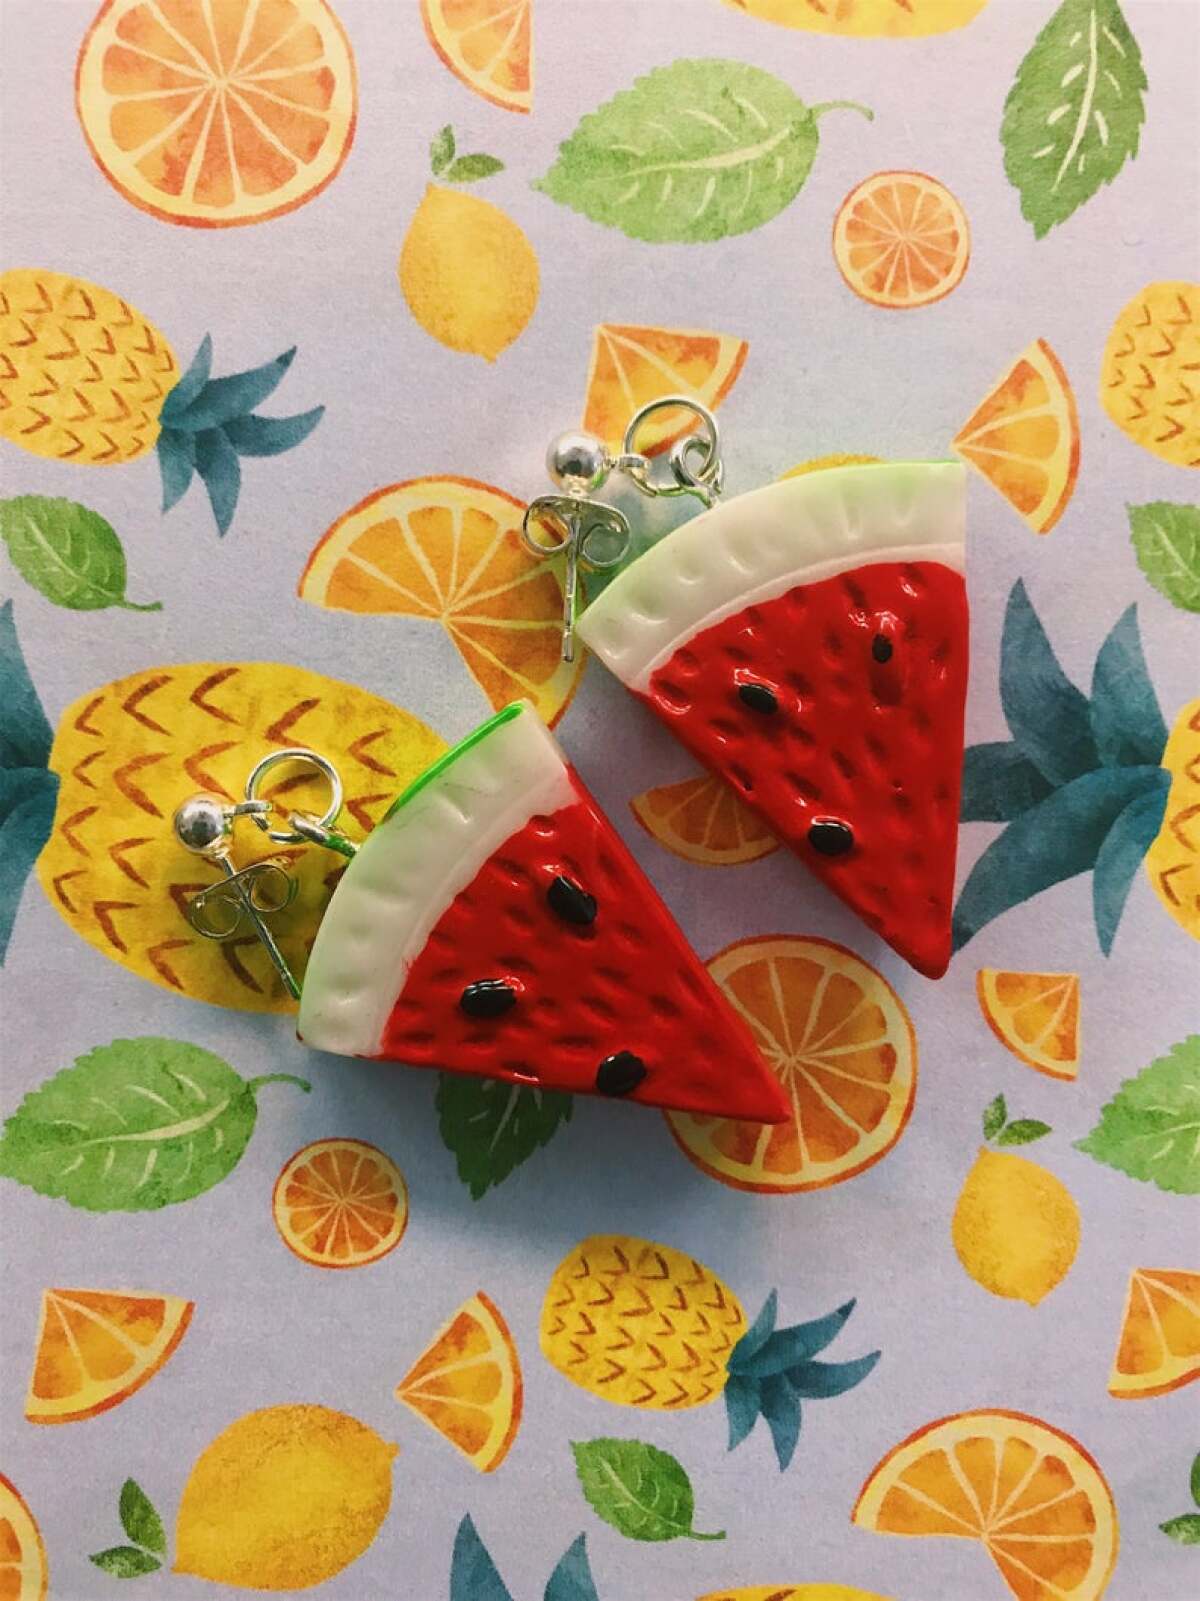 Watermelon wedge earrings from Whimsical Finds.